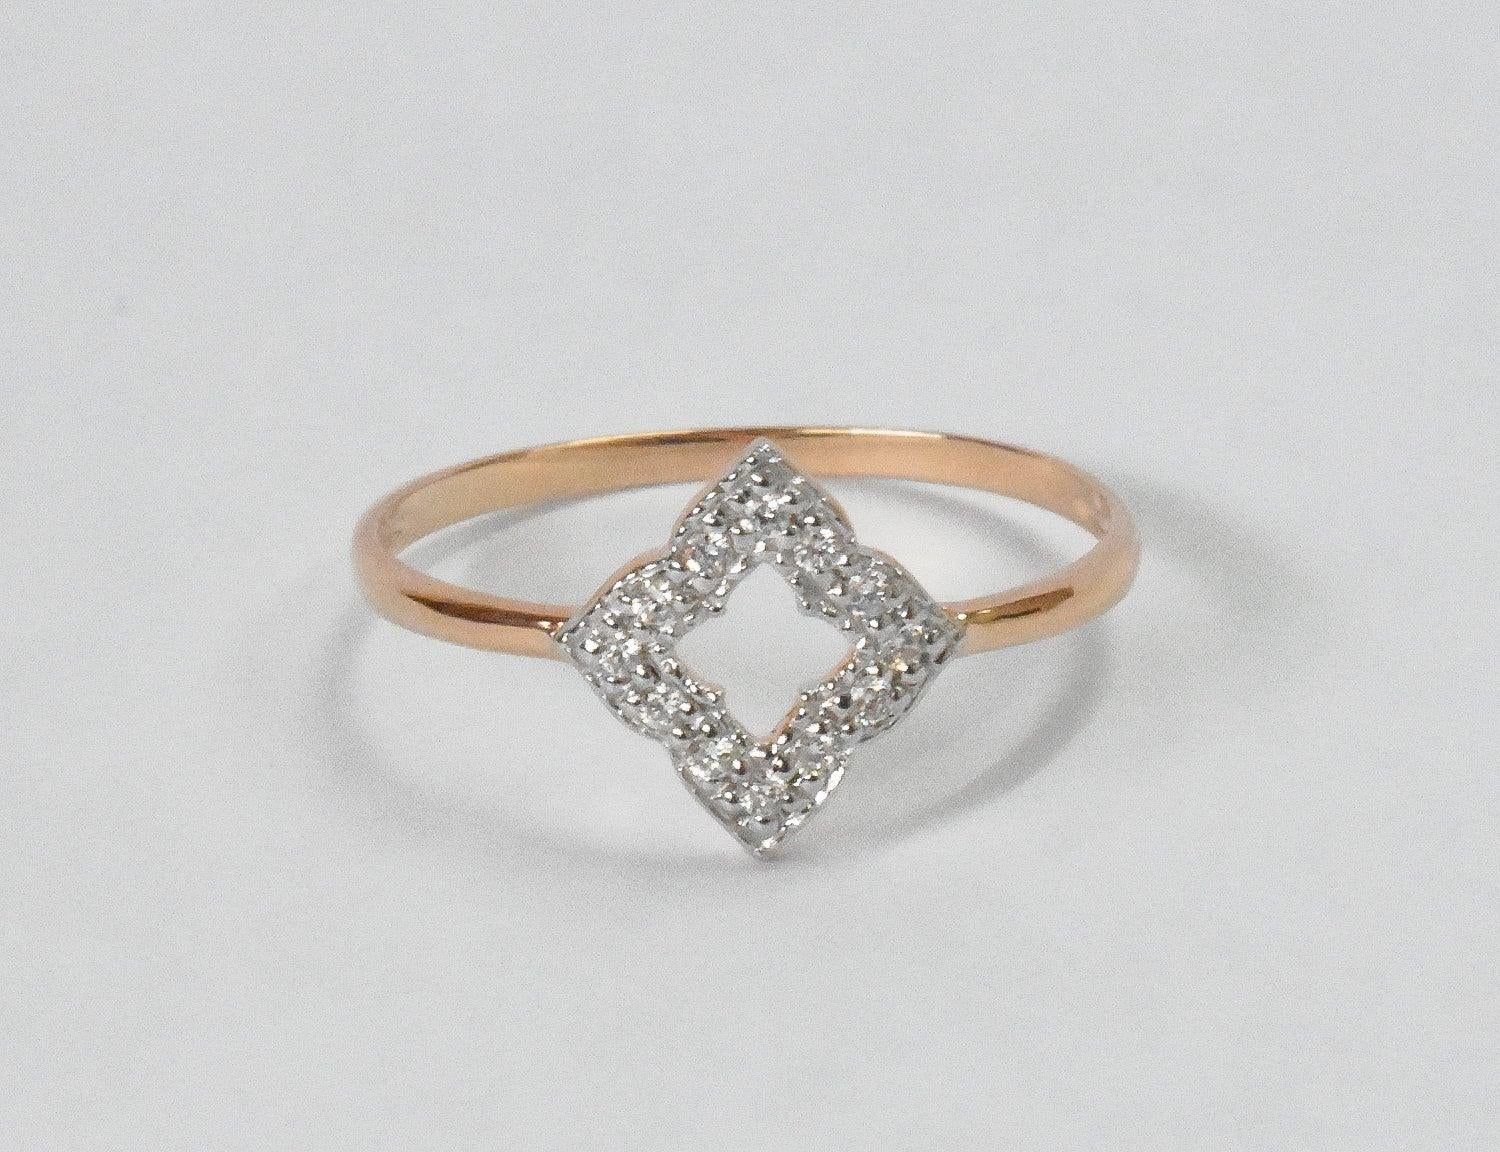 For Sale:  14k Gold Diamond Clover Ring Engagement Ring Stackable Diamond Ring 2